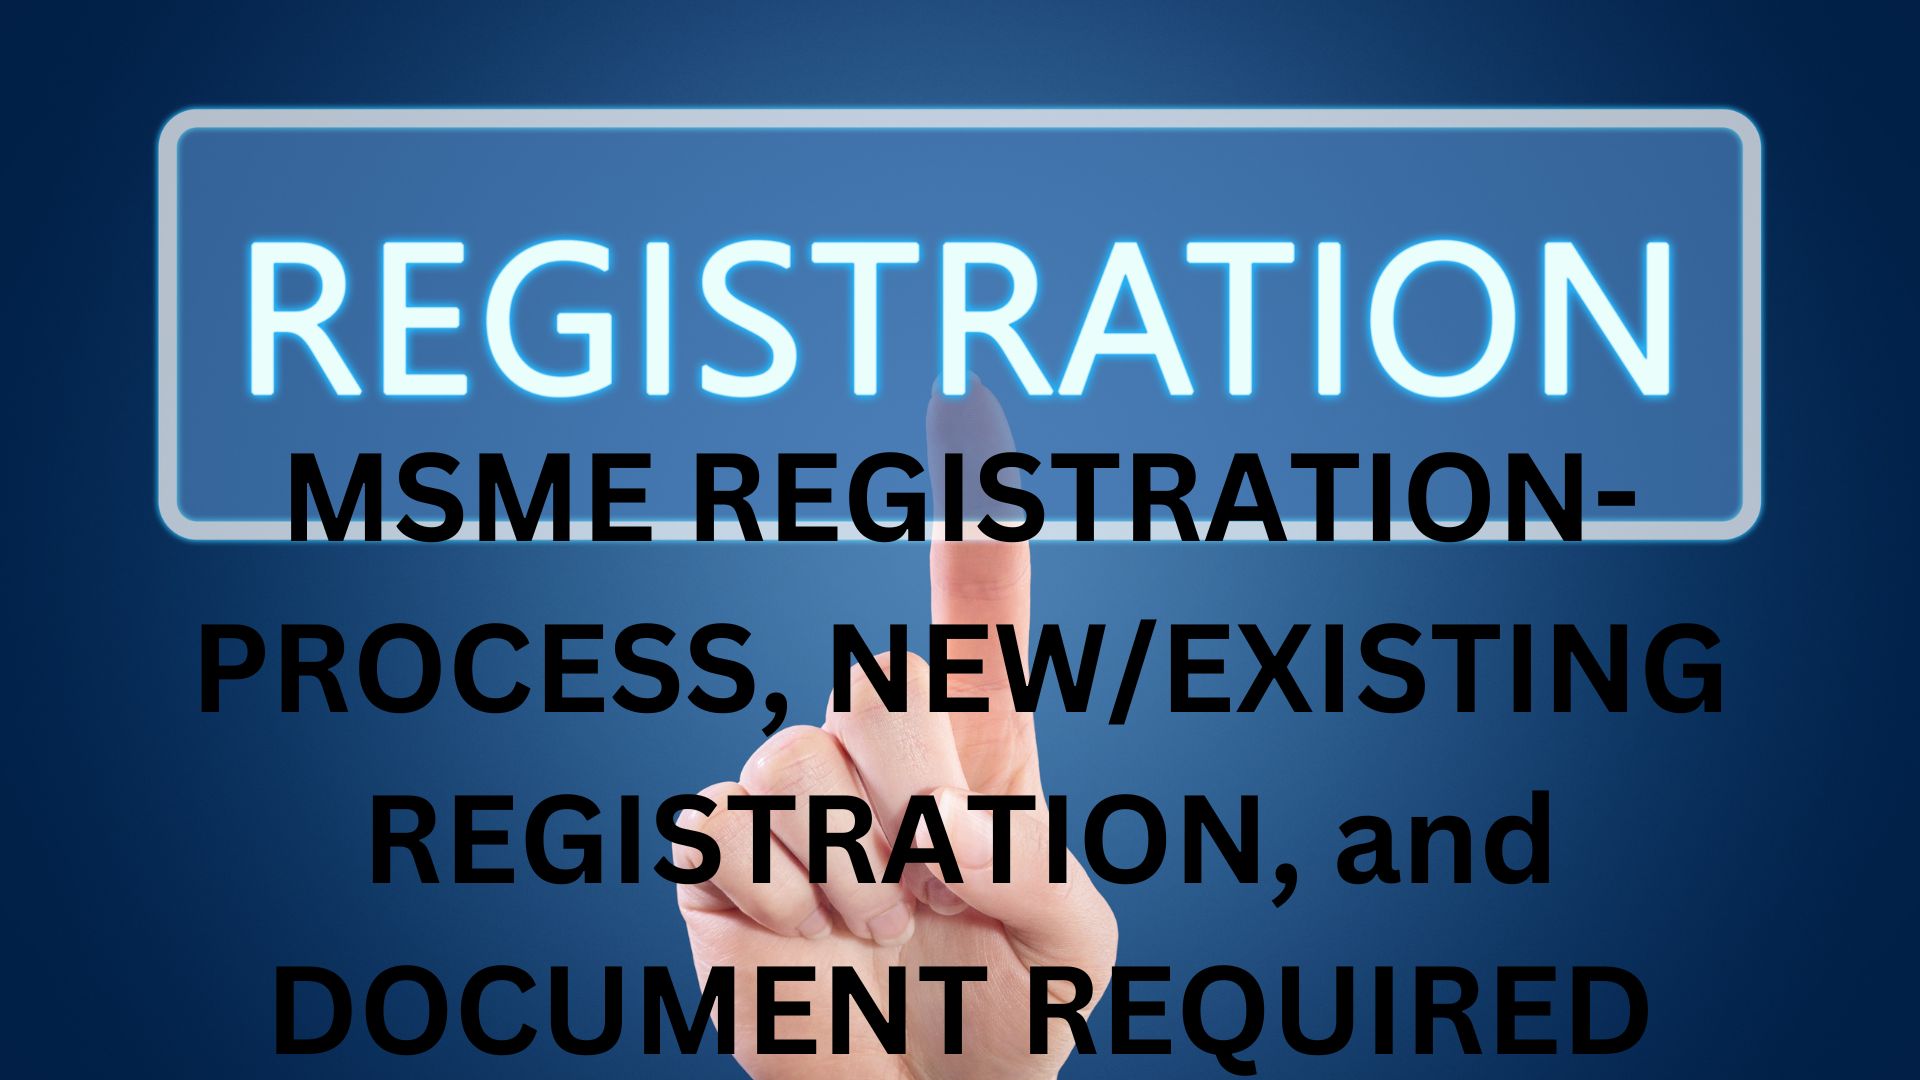 MSME REGISTRATION-PROCESS, NEW/EXISTING REGISTRATION, and DOCUMENT REQUIRED